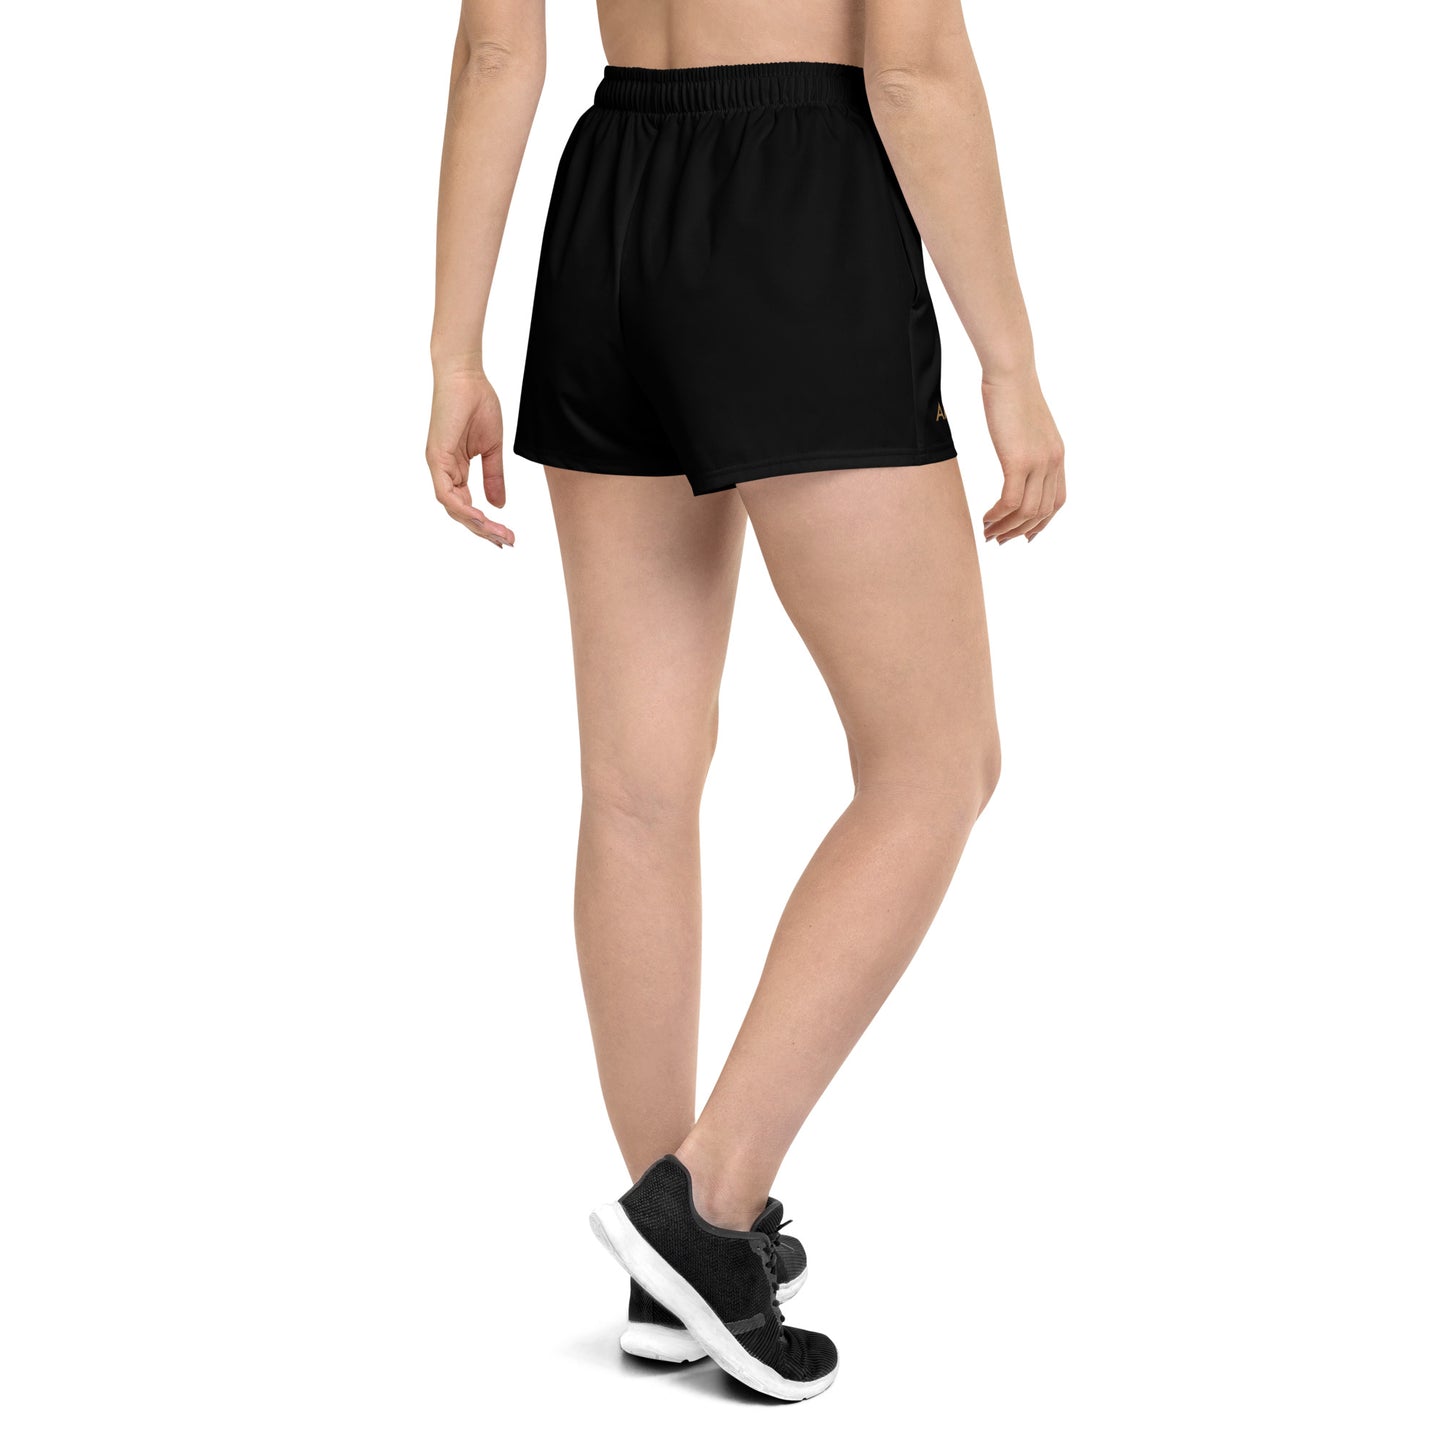 Almost There Women’s Recycled Inspirational Athletic Shorts